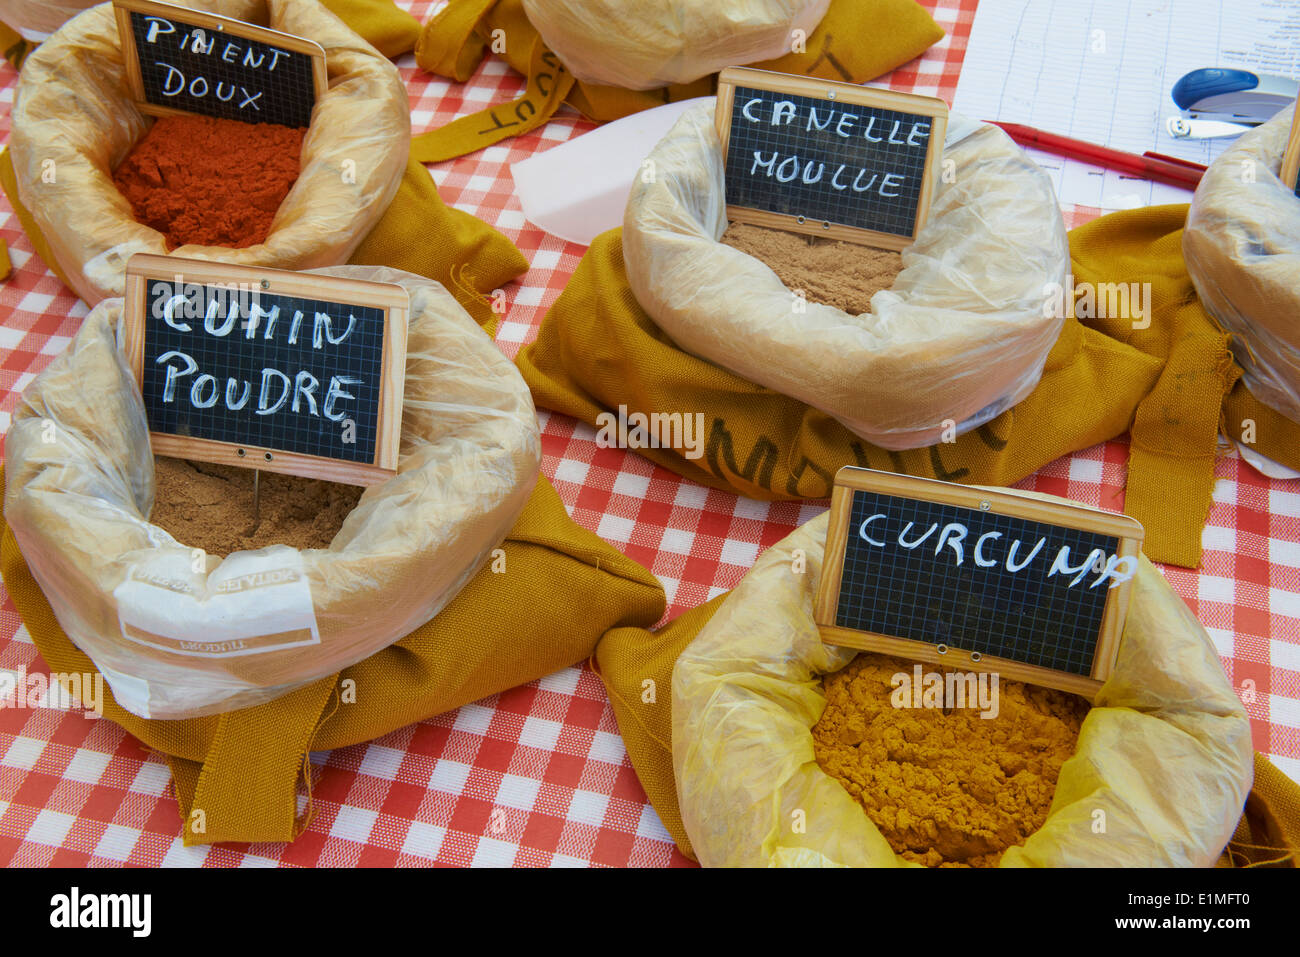 France, Languedoc-Roussillon, Herault depatment, Capestang, spices at the local market Stock Photo